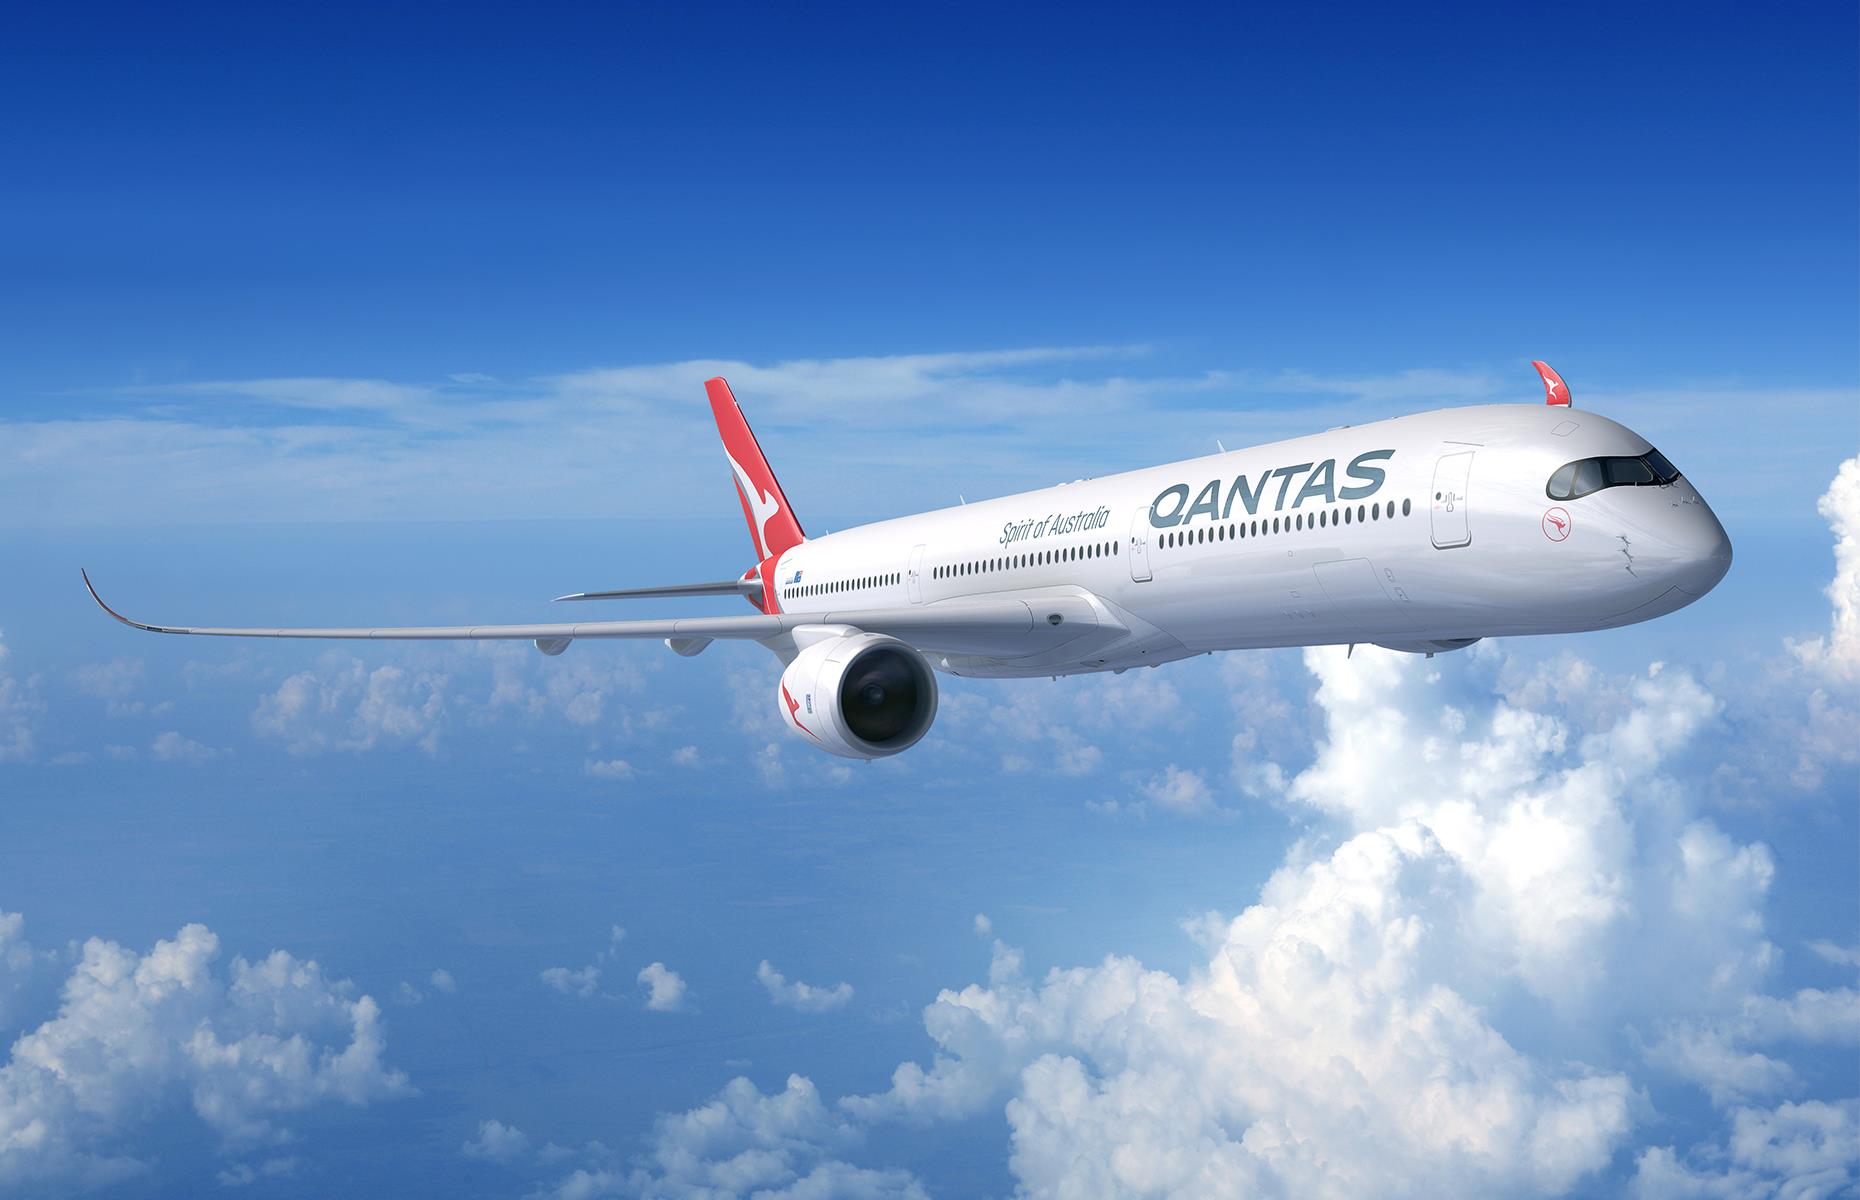 <p>In 2019, <a href="https://www.qantas.com/travelinsider/en/trending/london-sydney-non-stop-long-haul-qantas-flight-project-sunrise.html">a test flight</a> saw a Boeing 787-9 Dreamliner travel direct from London’s Heathrow Airport to Sydney in 19 hours and 19 minutes. A flight from New York to Sydney, with a journey time of 19 hours 16 minutes, was also trialed that year. It was originally thought that flights could begin as early as 2022, though Qantas halted the project due to COVID-19. It’s set to be revisited again <a href="https://www.flightglobal.com/strategy/qantas-to-revisit-project-sunrise-at-end-2021-alan-joyce/141936.article">by the end of 2021</a>. </p>